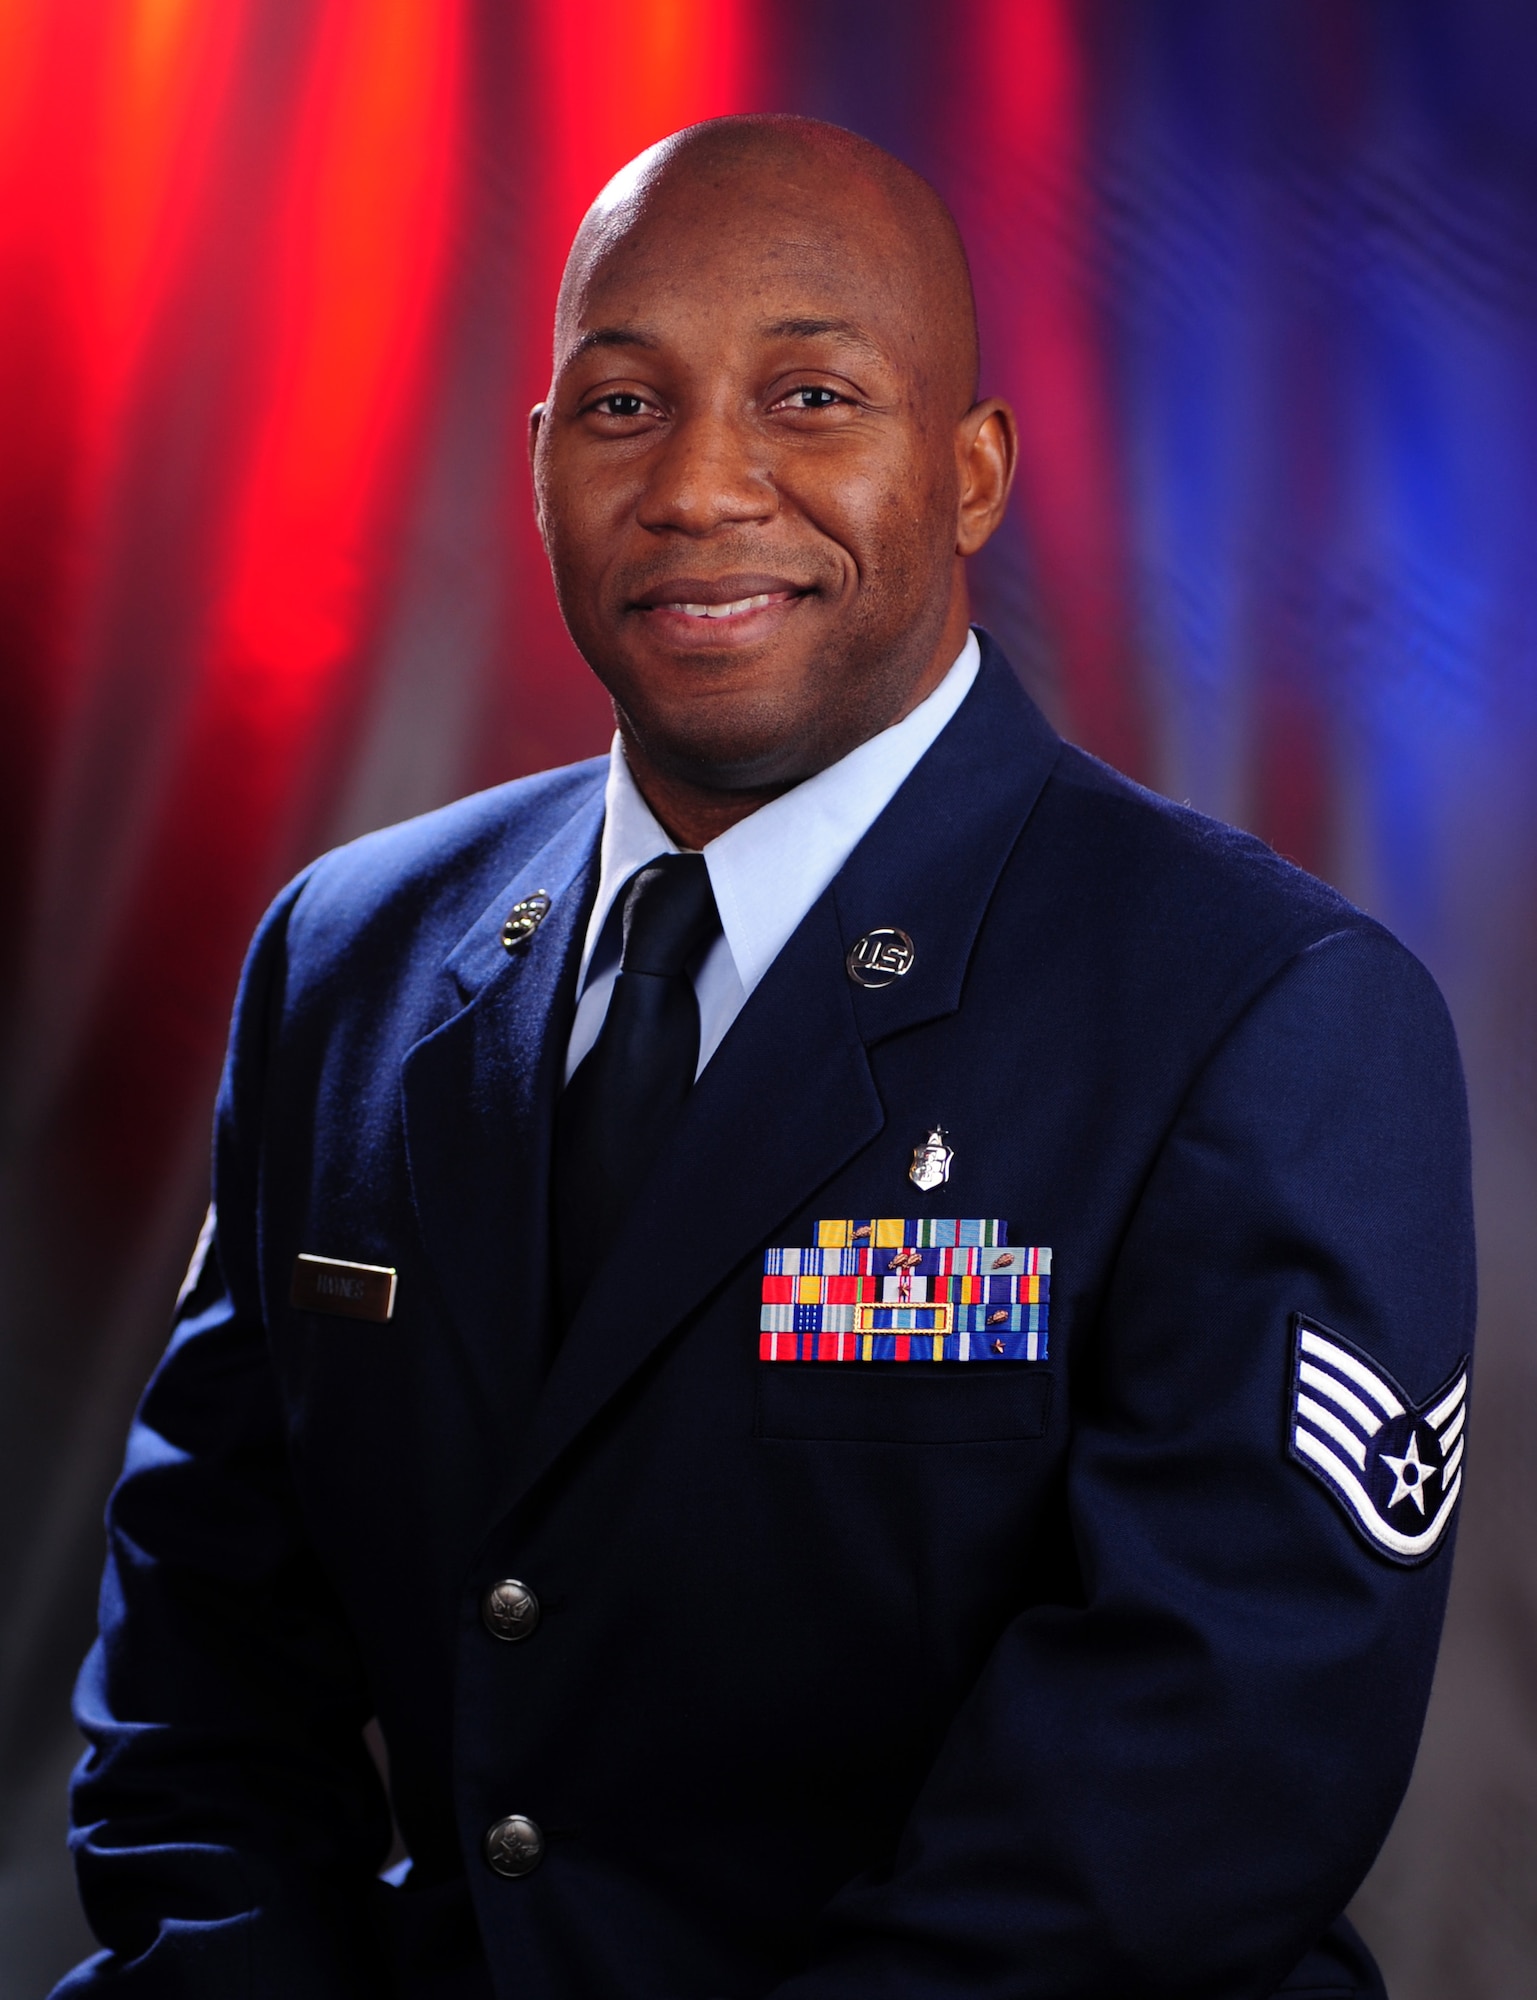 U.S. Air Force Staff Sgt. Arjune Haynes, 633rd Medical Operations Squadron cardiology noncommissioned officer in charge, reflects on his life at Langley Air Force Base, Va., Jan. 30, 2015. Born and raised in Chorrillo, Panama, Haynes said he experienced the effects of Operation Just Cause, the U.S. invasion of Panama, at the age of 10. Amidst the chaos, a U.S. Army Soldier approached the frightened boy, offered him a Baby Ruth candy bar and reassured him everything would be just fine. In that moment, Haynes realized he wanted to do for people what the Soldier did for him and the only way of accomplishing his goal would be to join the Air Force. (U.S. Air Force photo by Senior Airman Aubrey White/Released)